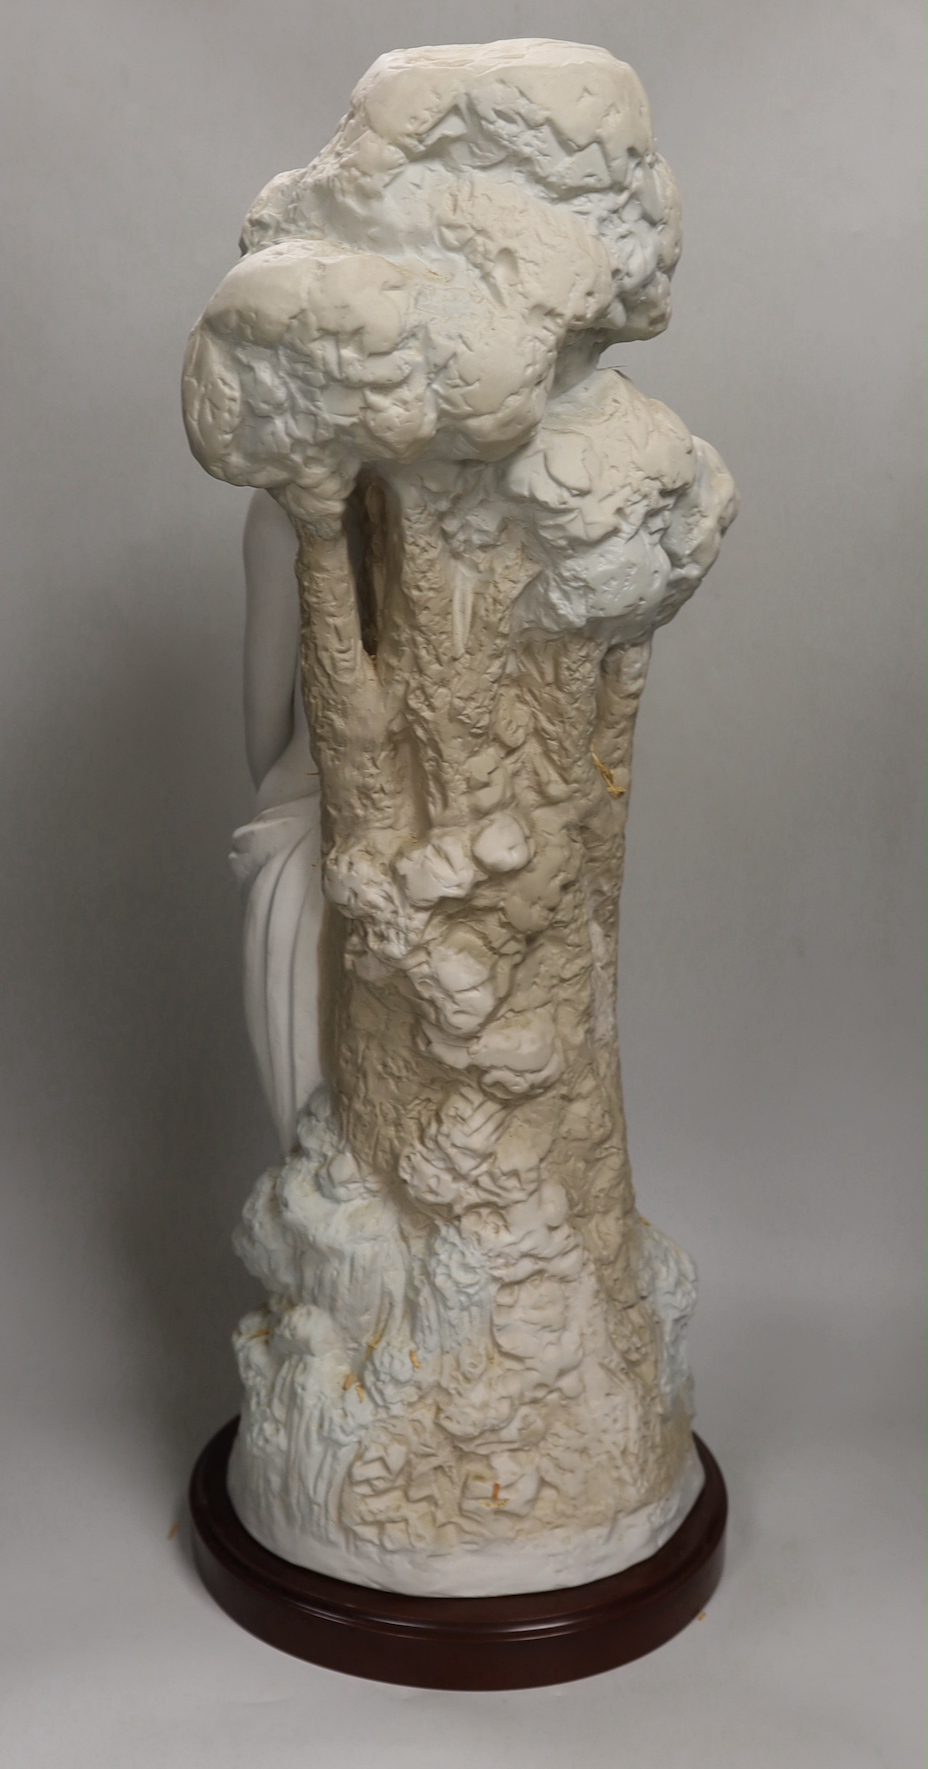 A large Lladro figure, 'La Denus del Cantaro', on stand with certificate, figure and stand 64cm high